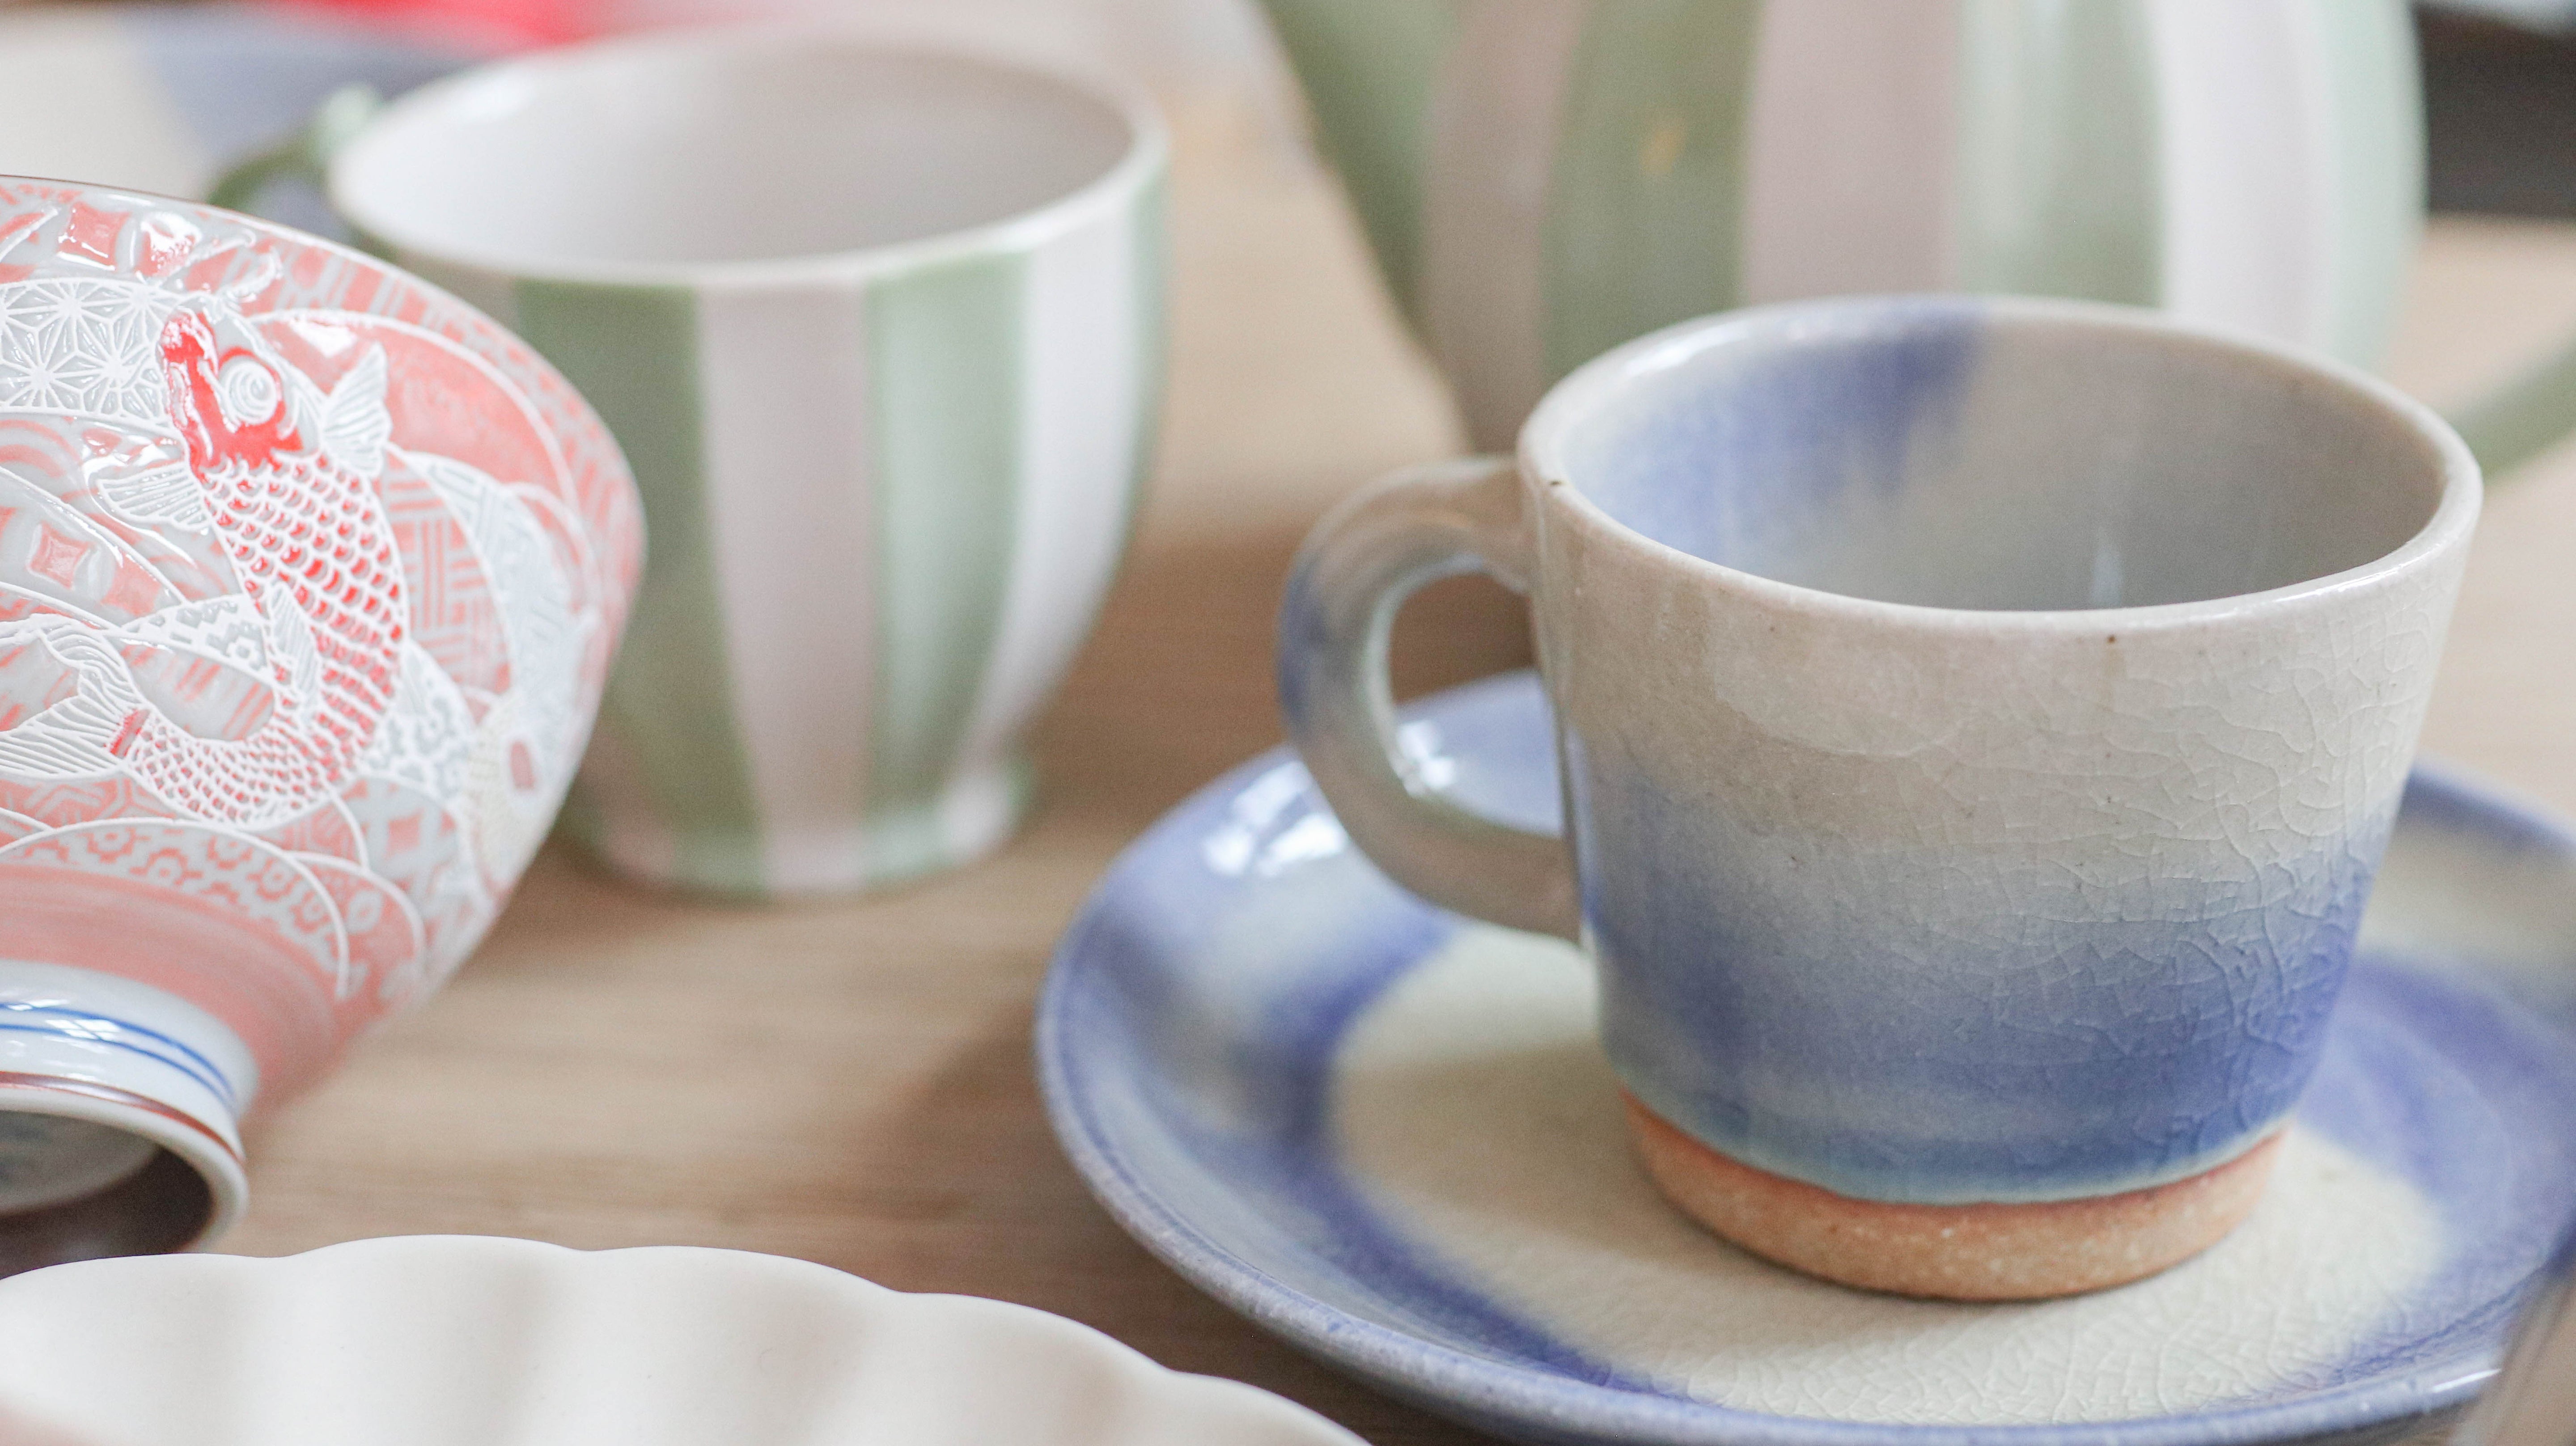 Ceramic cup and saucer with cracked blue glaze